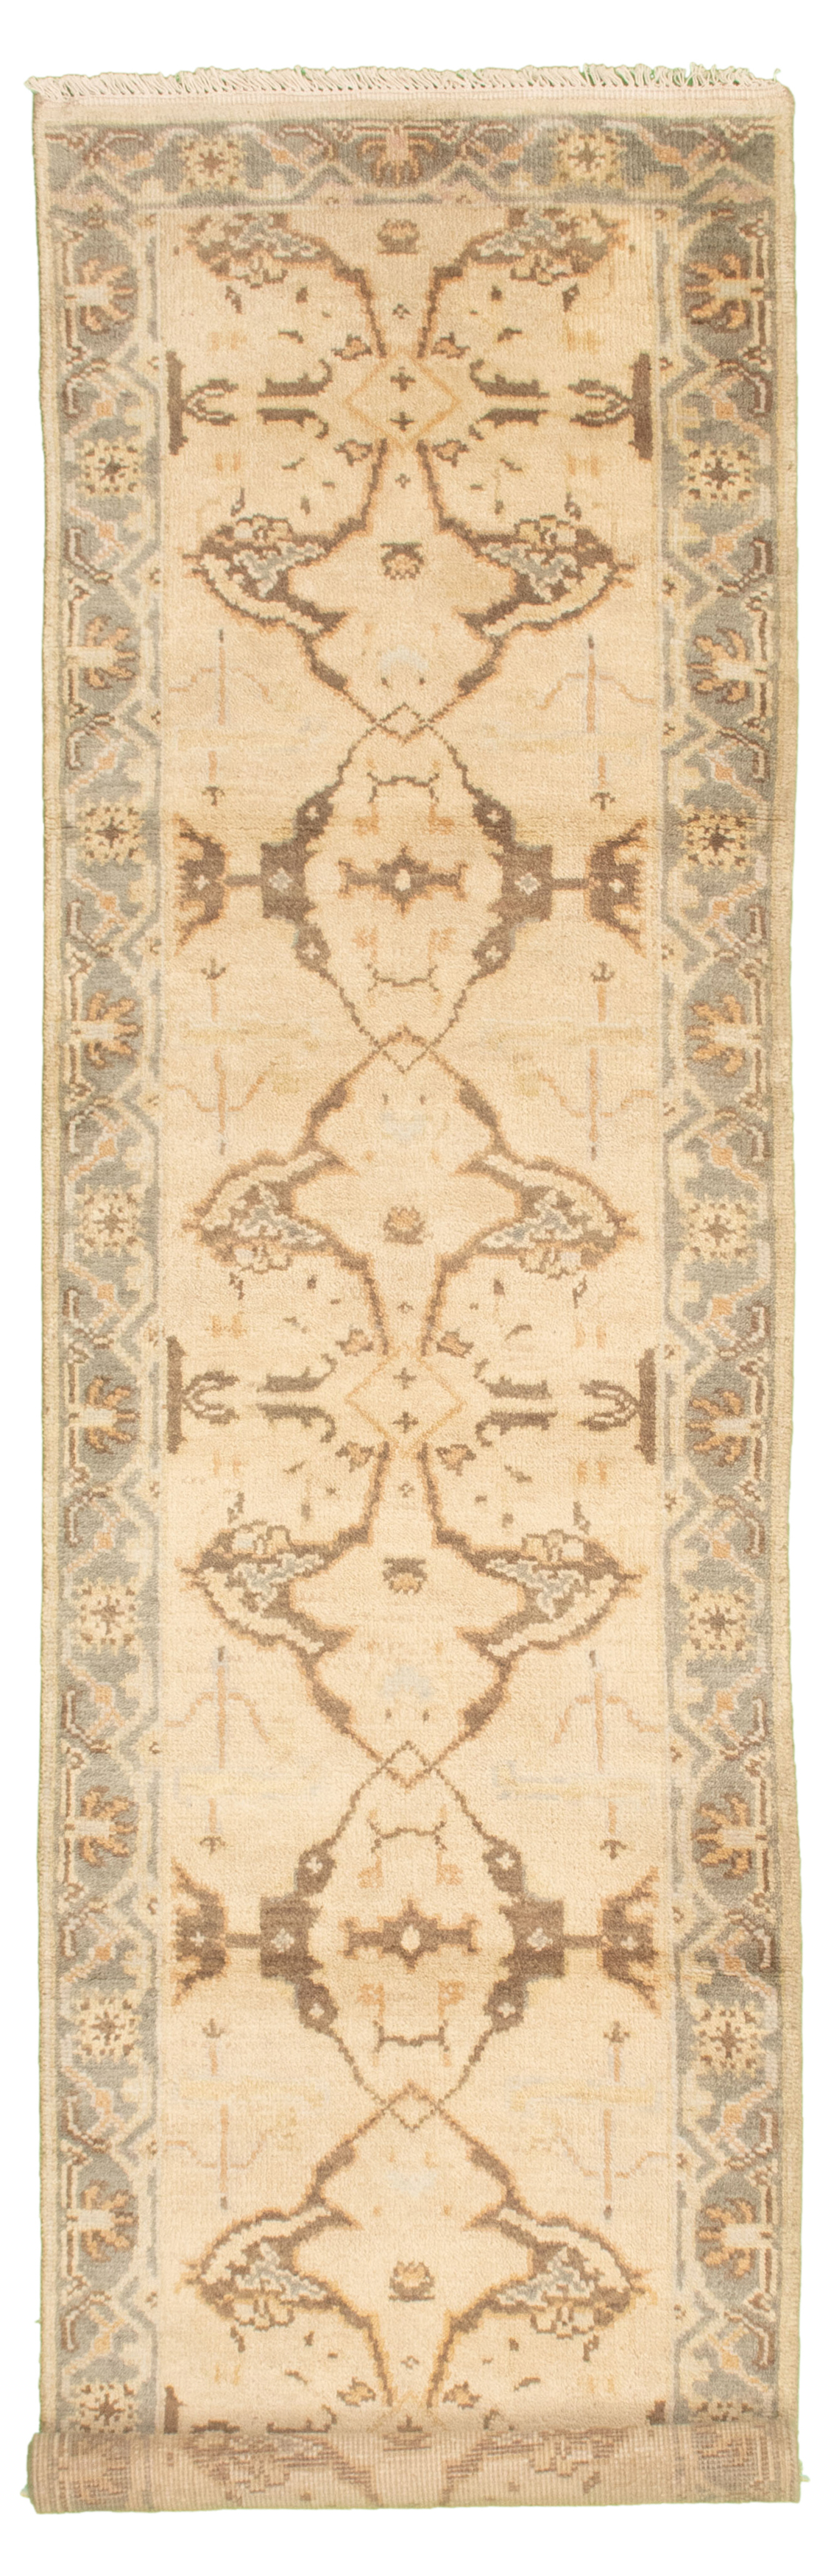 Hand-knotted Royal Ushak Beige Wool Rug 2'7" x 9'11" Size: 2'7" x 9'11"  